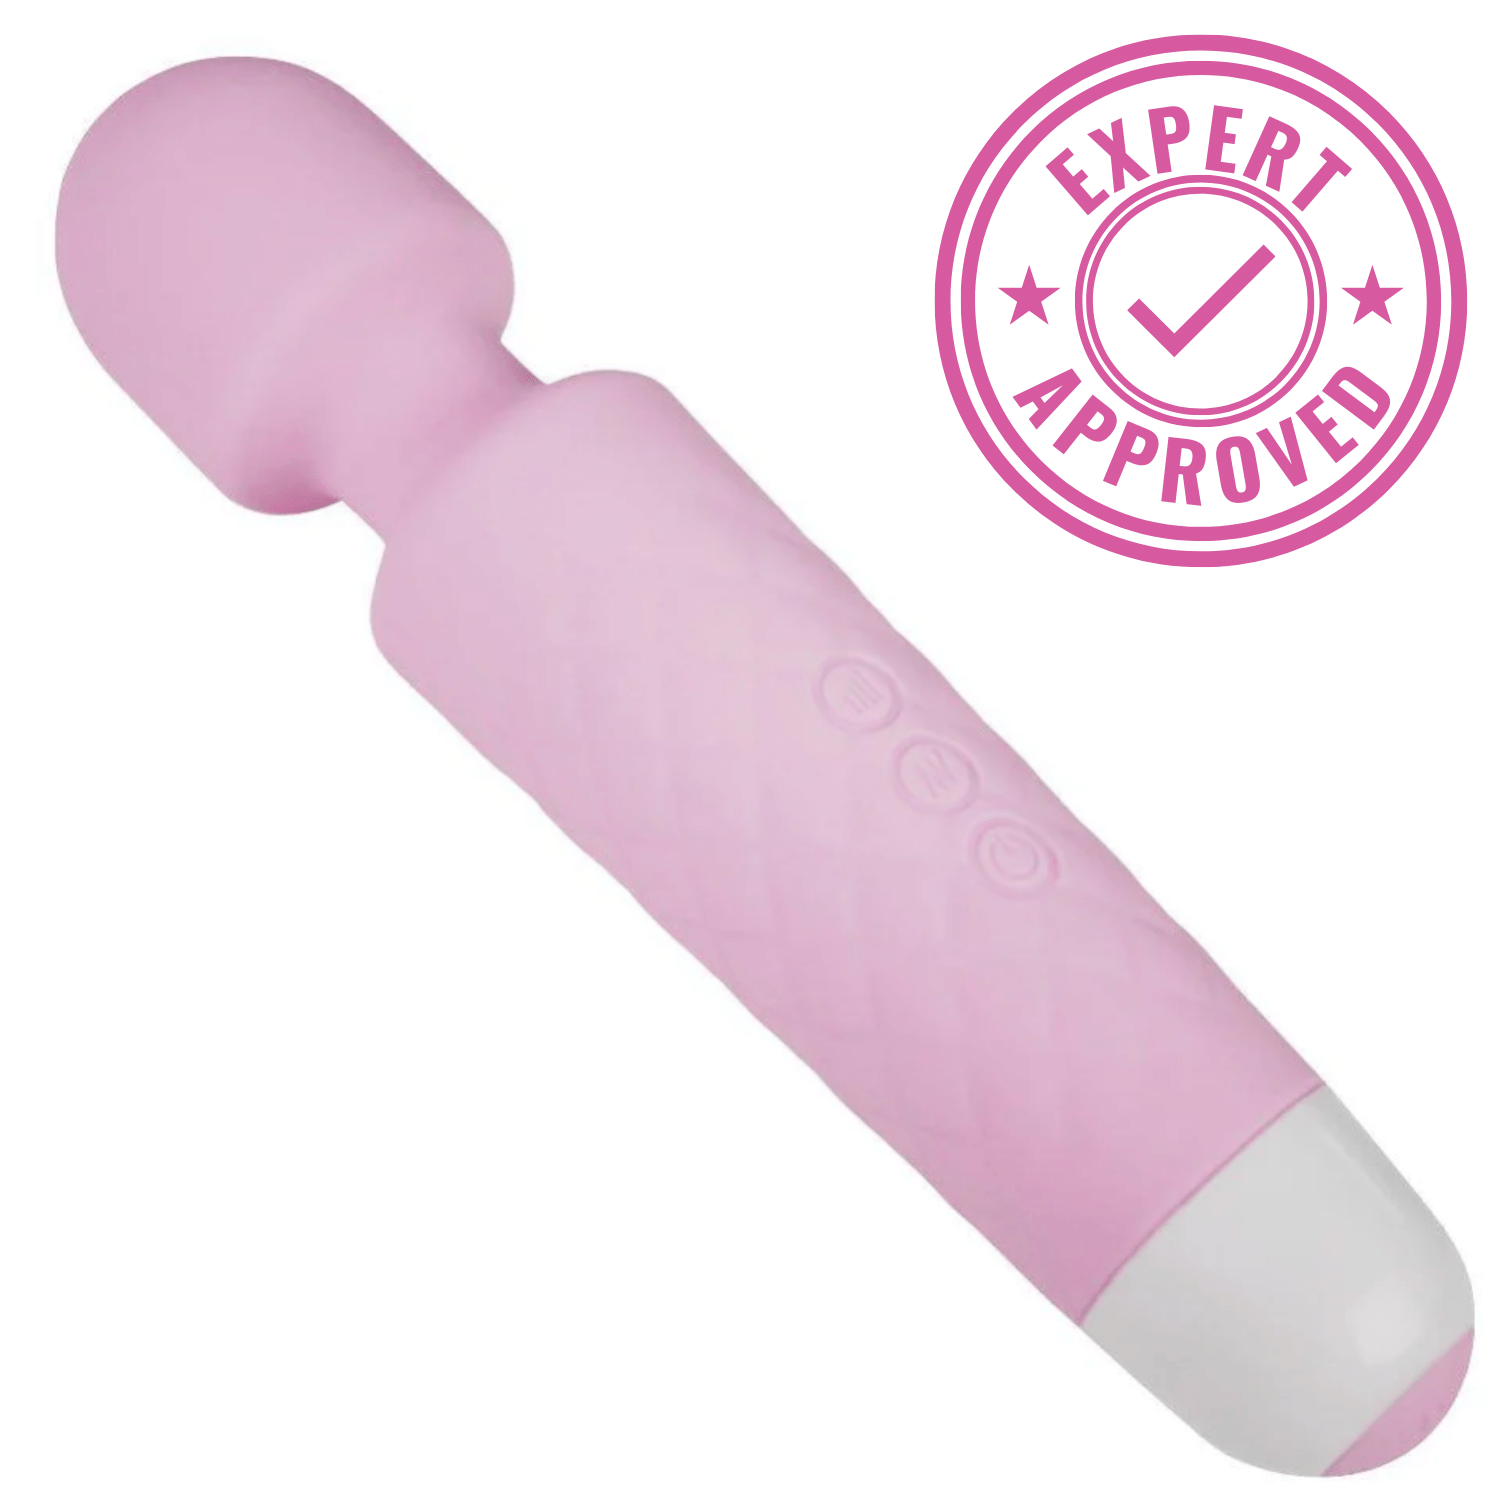 Rechargeable Vibrator Free Shipping Over